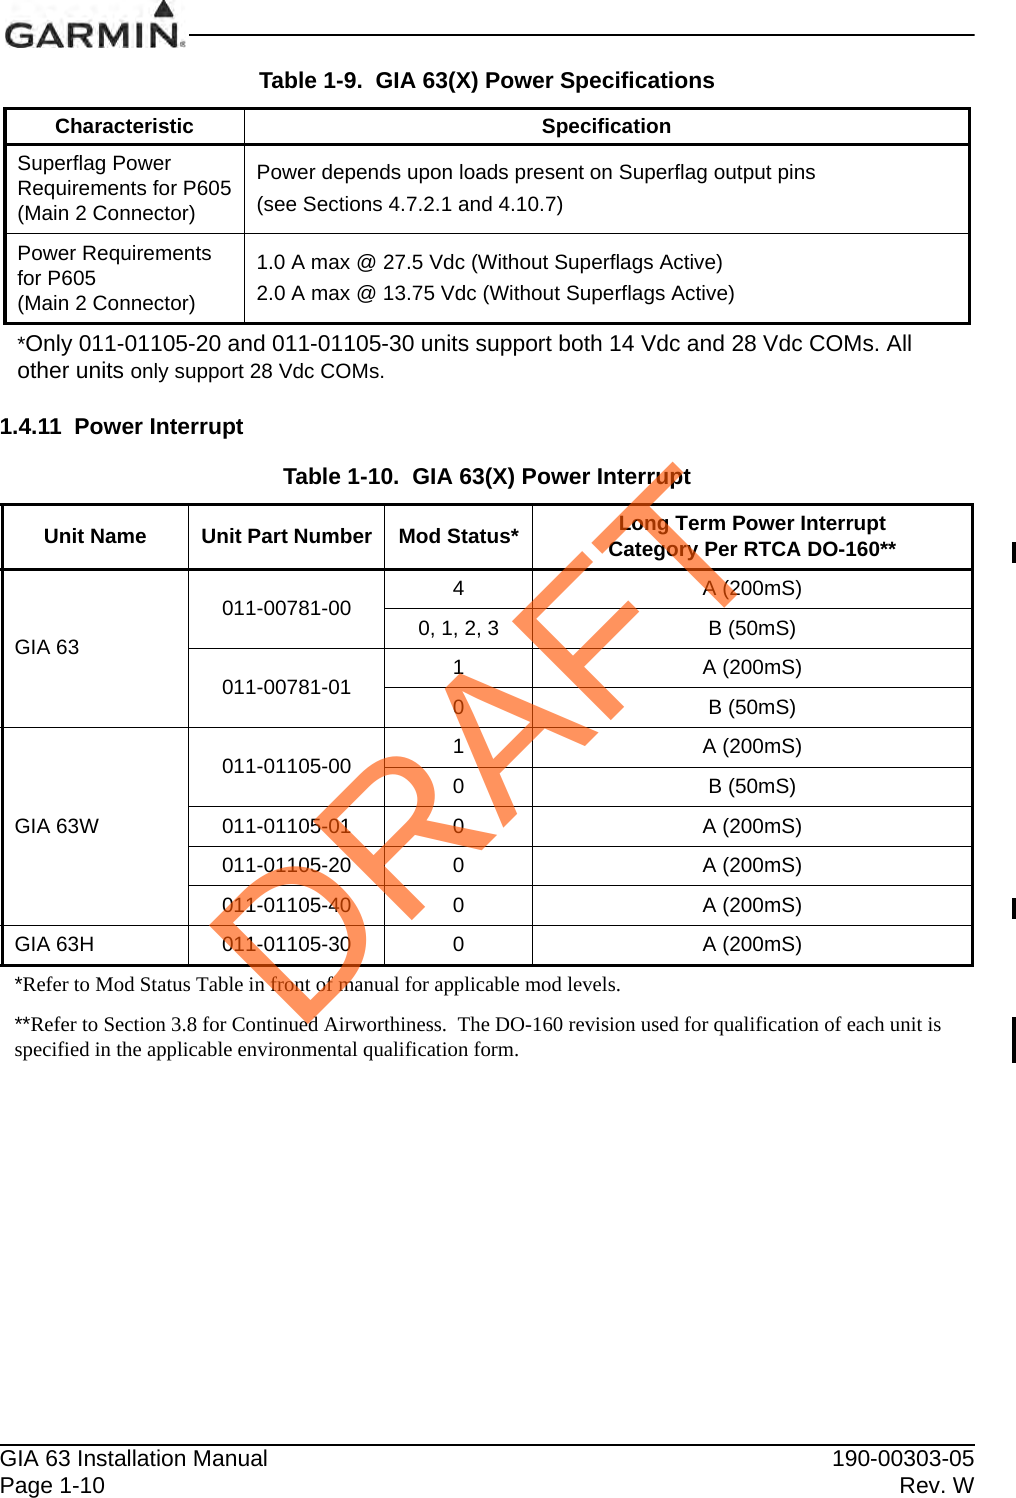 GIA 63 Installation Manual 190-00303-05Page 1-10 Rev. W1.4.11 Power InterruptSuperflag PowerRequirements for P605(Main 2 Connector)Power depends upon loads present on Superflag output pins(see Sections 4.7.2.1 and 4.10.7)Power Requirementsfor P605(Main 2 Connector)1.0 A max @ 27.5 Vdc (Without Superflags Active)2.0 A max @ 13.75 Vdc (Without Superflags Active)*Only 011-01105-20 and 011-01105-30 units support both 14 Vdc and 28 Vdc COMs. All other units only support 28 Vdc COMs.Table 1-10.  GIA 63(X) Power InterruptUnit Name Unit Part Number Mod Status* Long Term Power Interrupt Category Per RTCA DO-160**GIA 63011-00781-00 4A (200mS)0, 1, 2, 3 B (50mS)011-00781-01 1A (200mS)0B (50mS)GIA 63W011-01105-00 1A (200mS)0B (50mS)011-01105-01 0A (200mS)011-01105-20 0A (200mS)011-01105-40 0A (200mS)GIA 63H 011-01105-30 0A (200mS)*Refer to Mod Status Table in front of manual for applicable mod levels.**Refer to Section 3.8 for Continued Airworthiness.  The DO-160 revision used for qualification of each unit is specified in the applicable environmental qualification form.Table 1-9.  GIA 63(X) Power SpecificationsCharacteristic SpecificationDRAFT